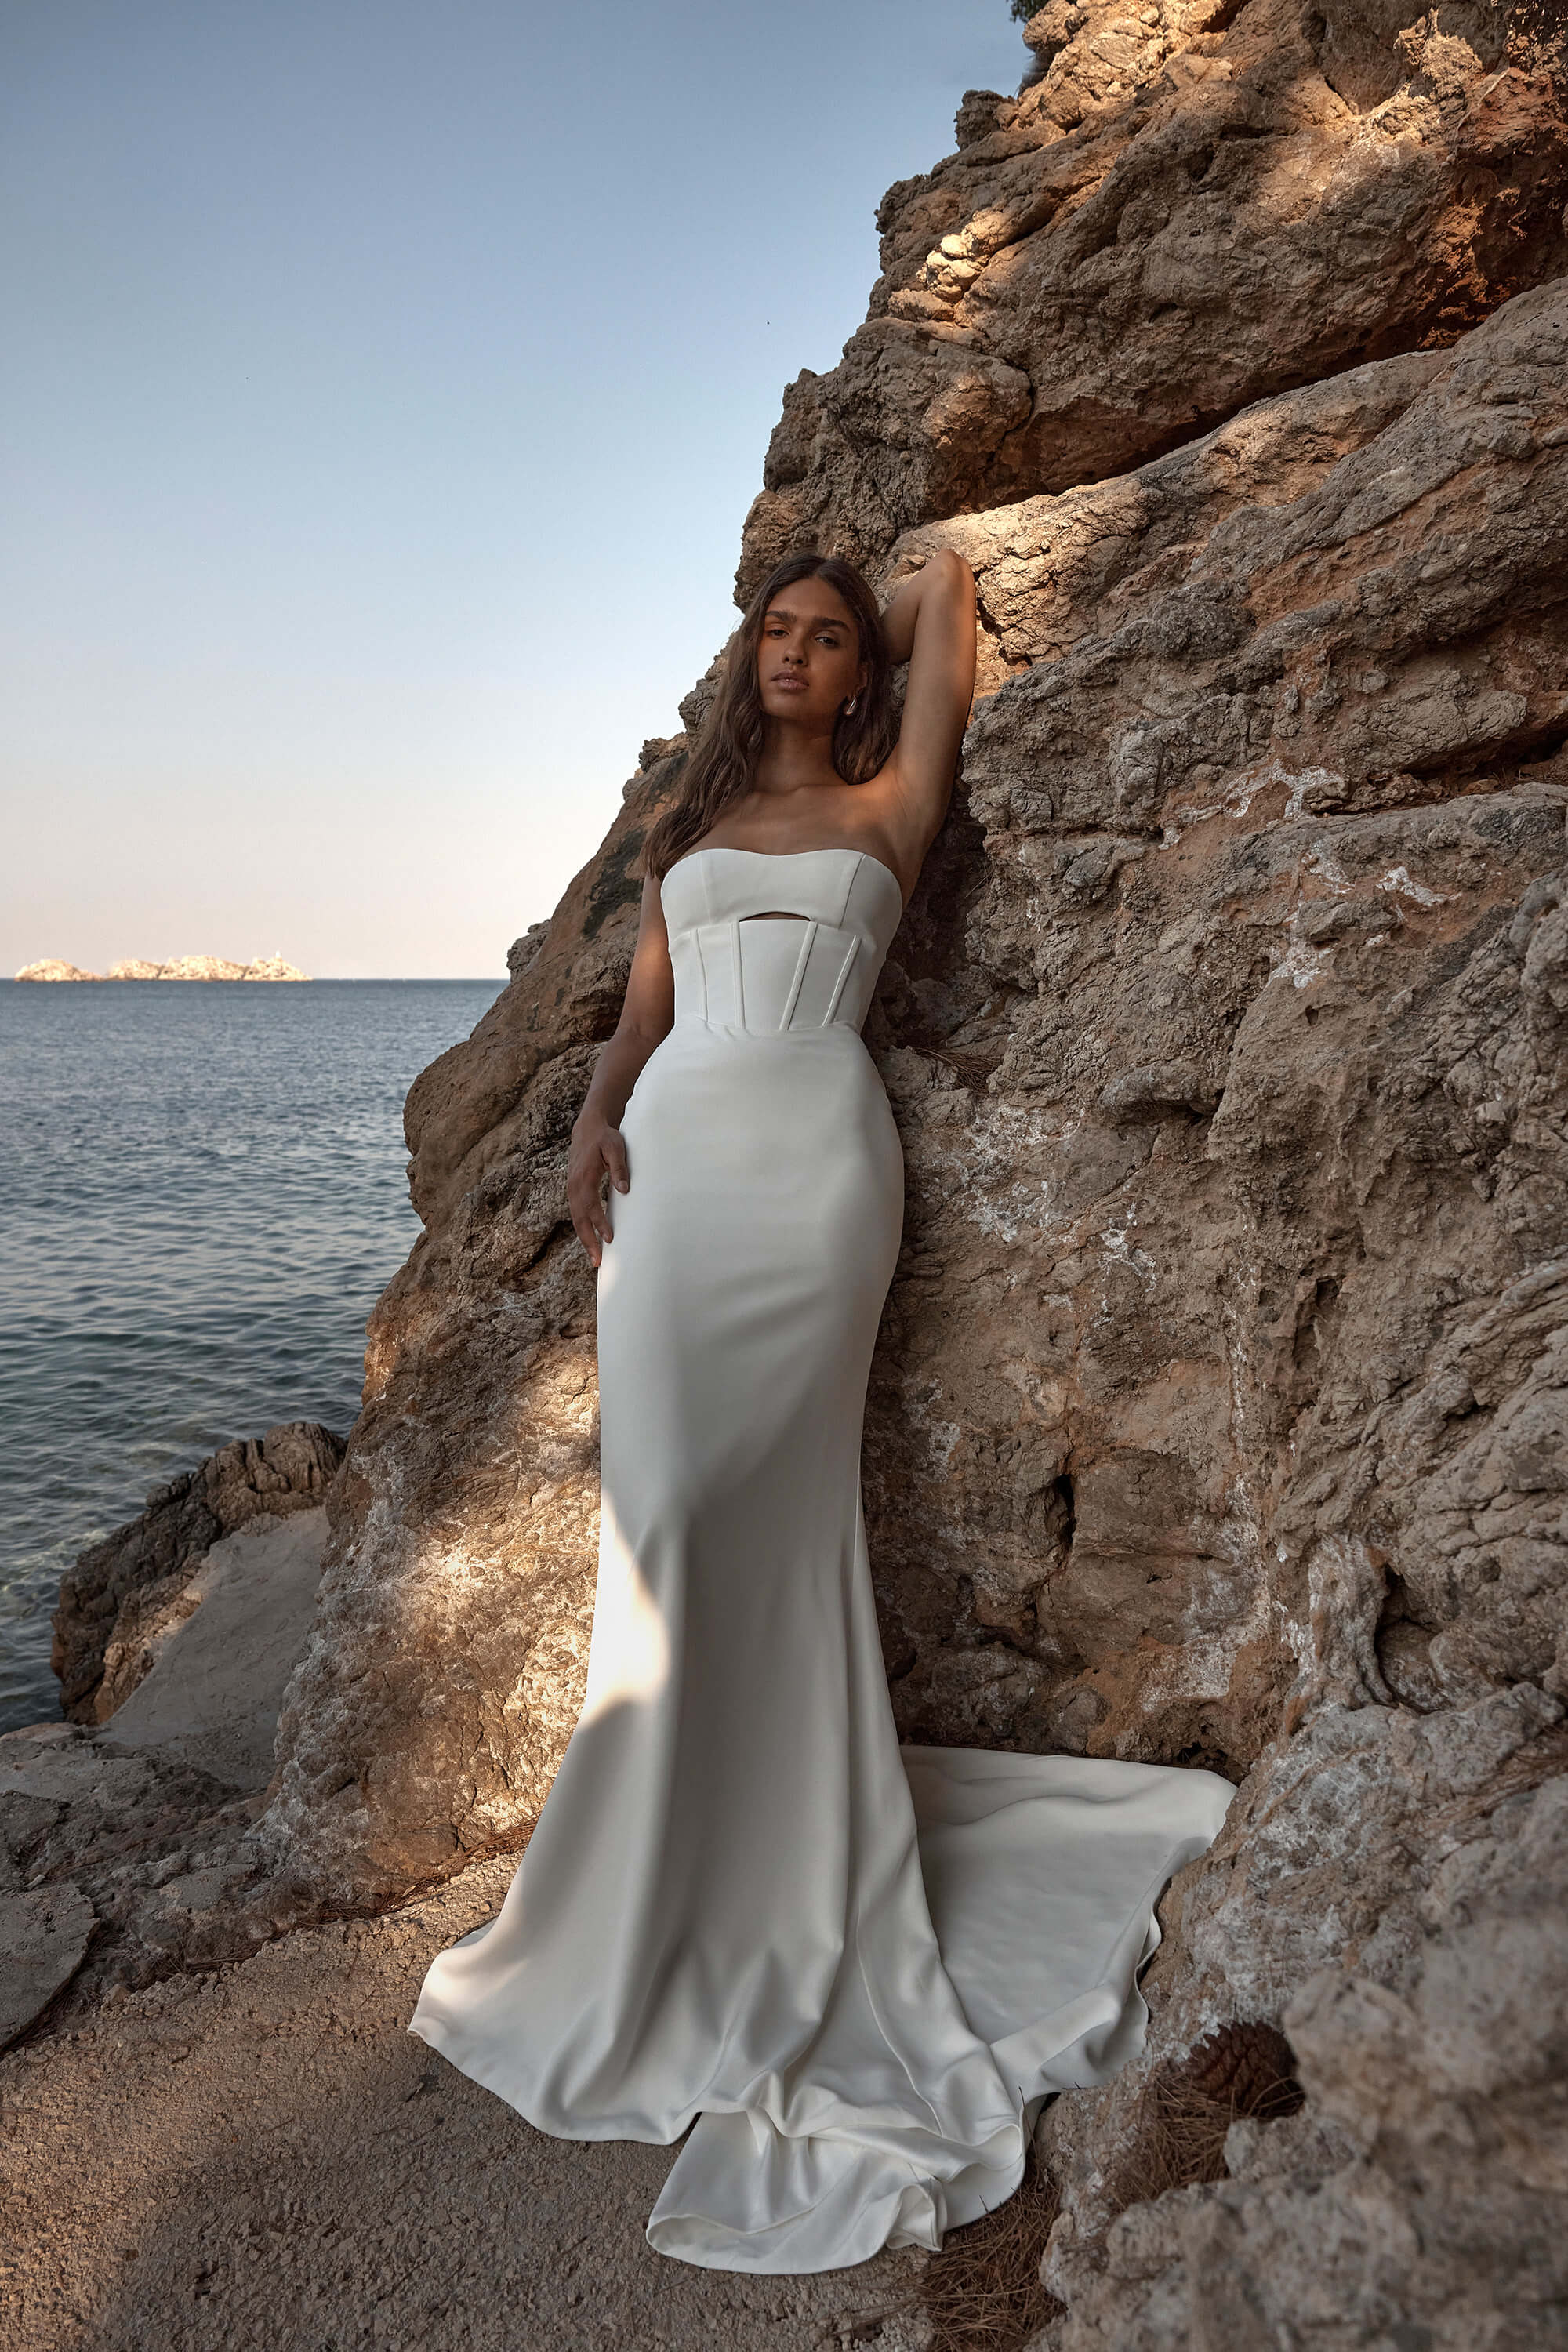 bridal stores Melbourne and sydney try wedding gowns melbourne and sydney